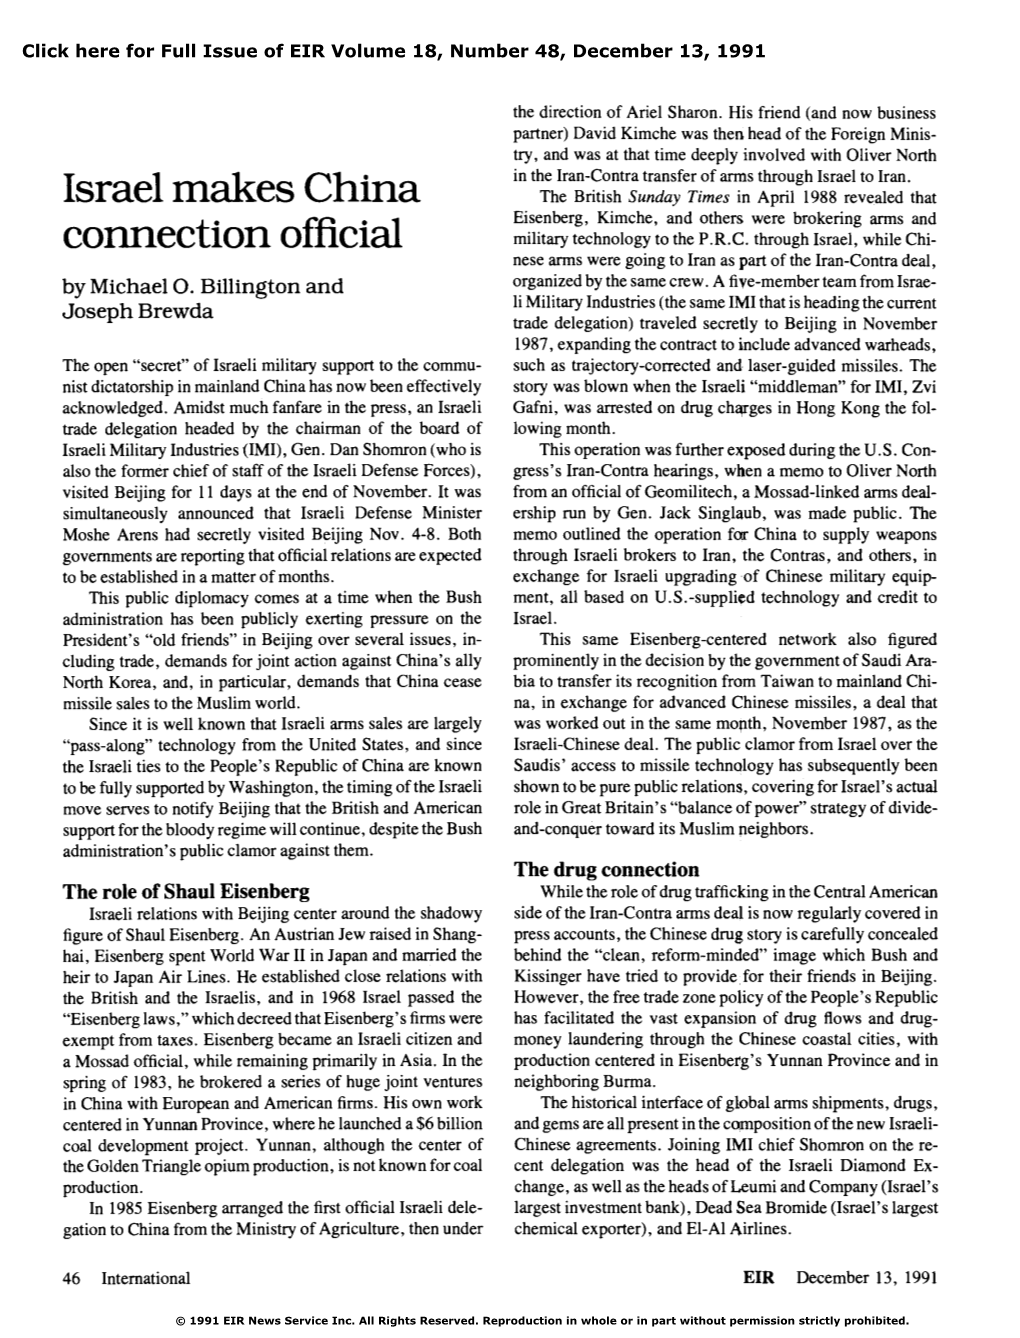 Israel Makes China Connection Official